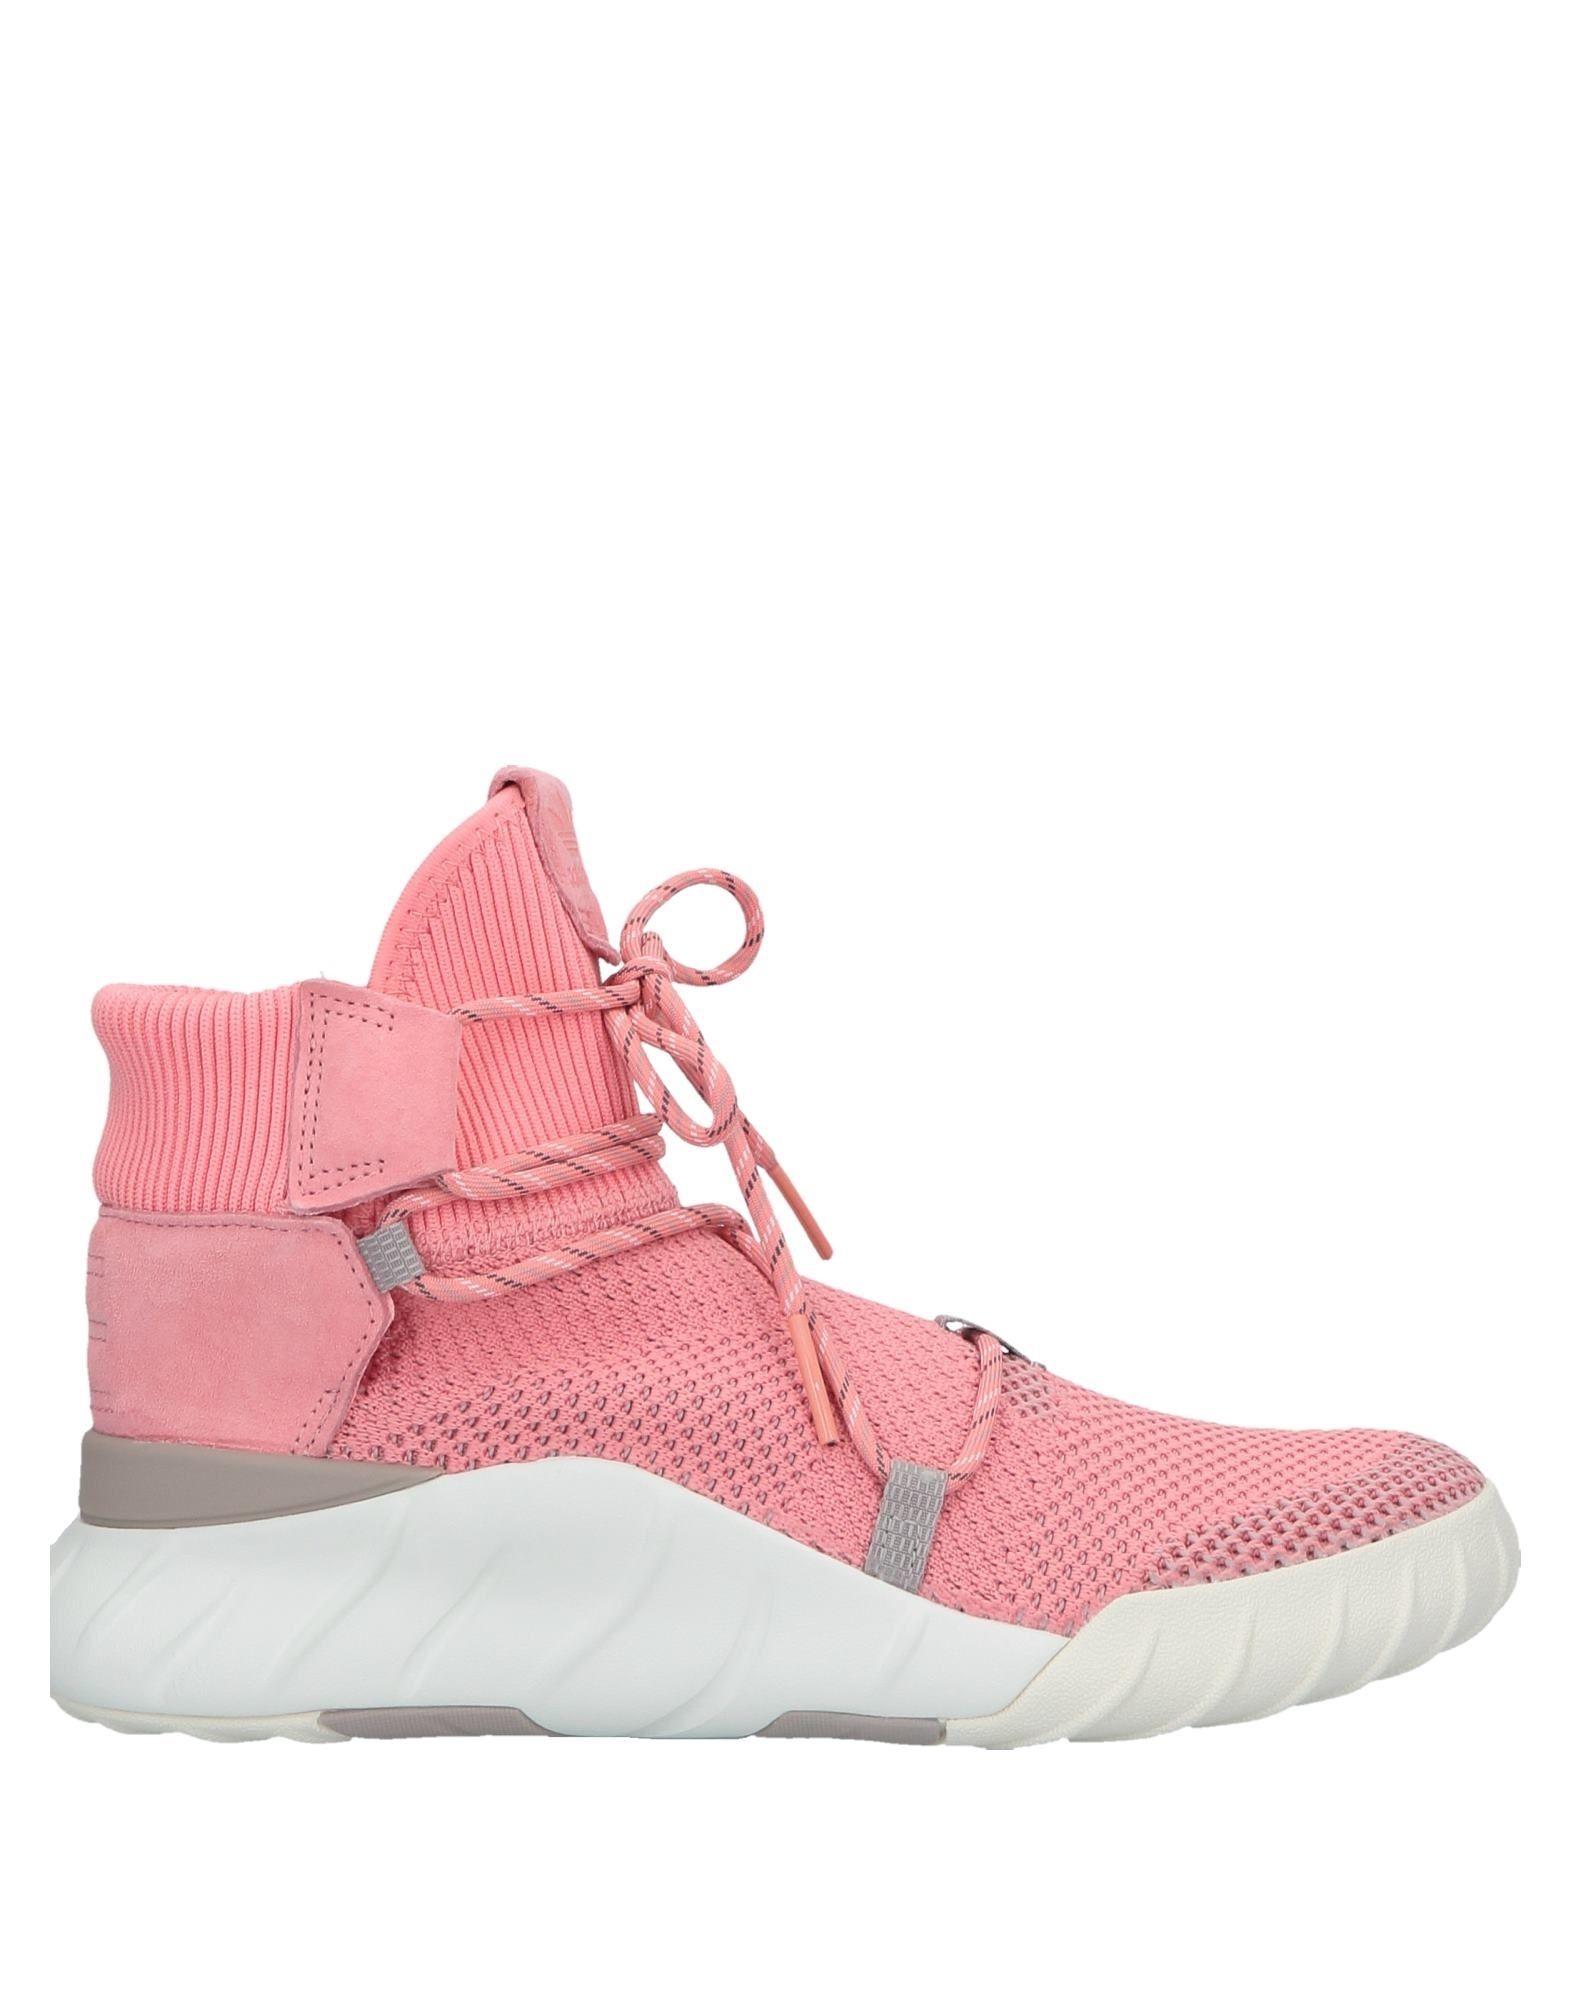 adidas Originals Leather High-tops & Sneakers in Salmon Pink (Pink) - Lyst